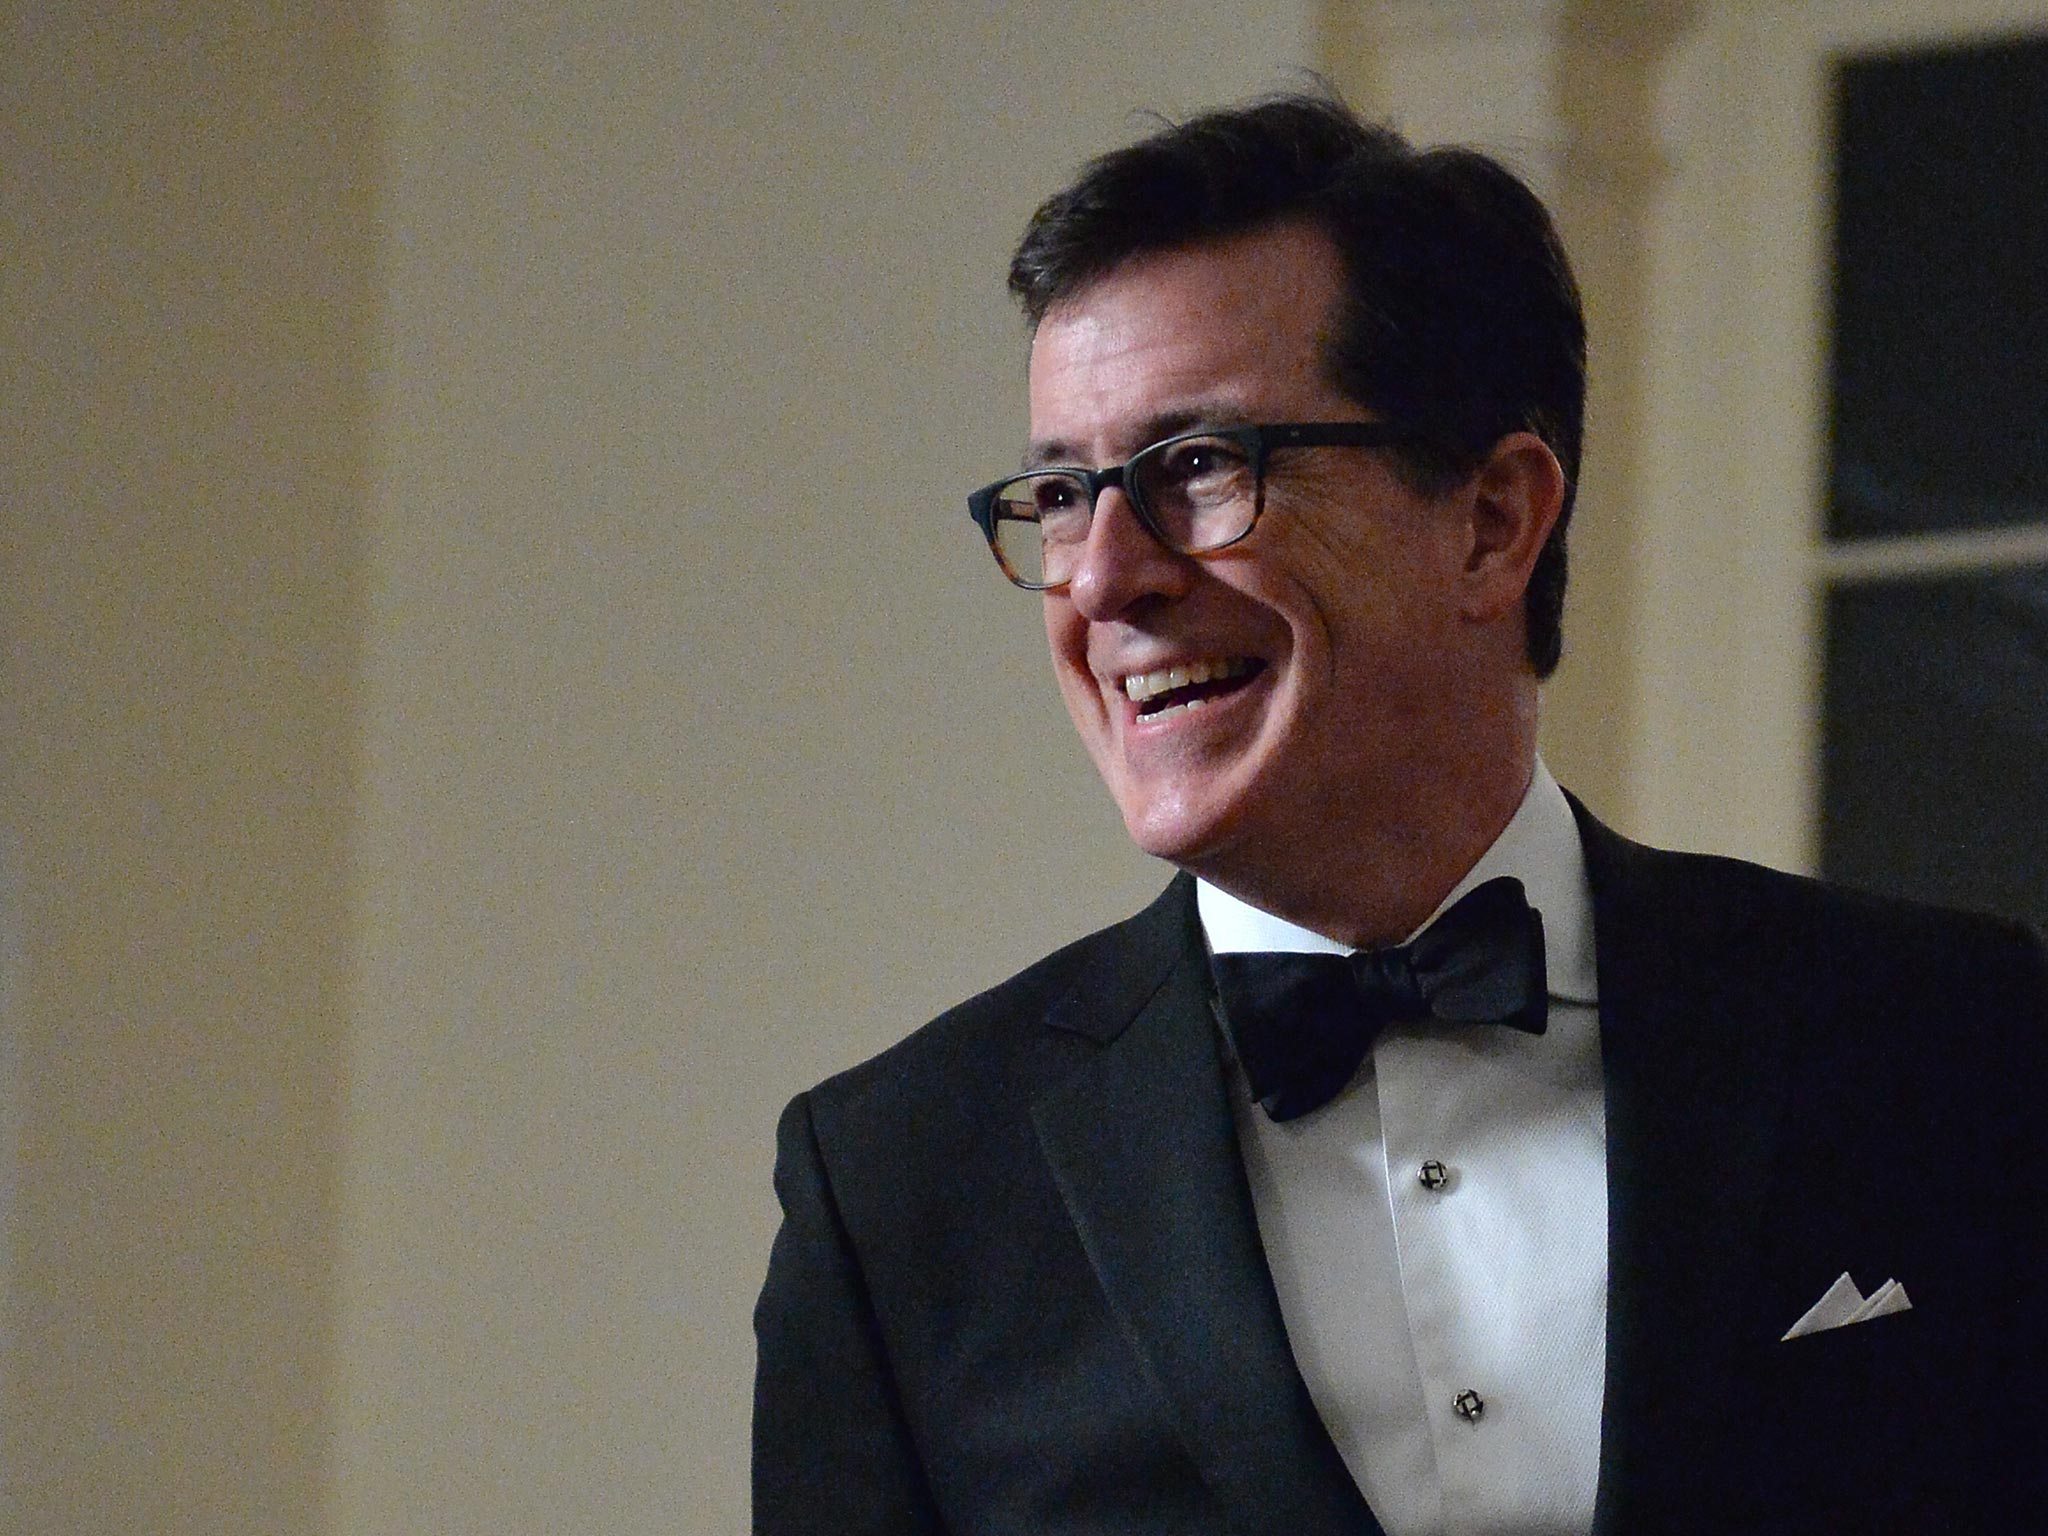 Stephen Colbert will be leaving his persona behind and simple being himself for the Late Show, insiders have said